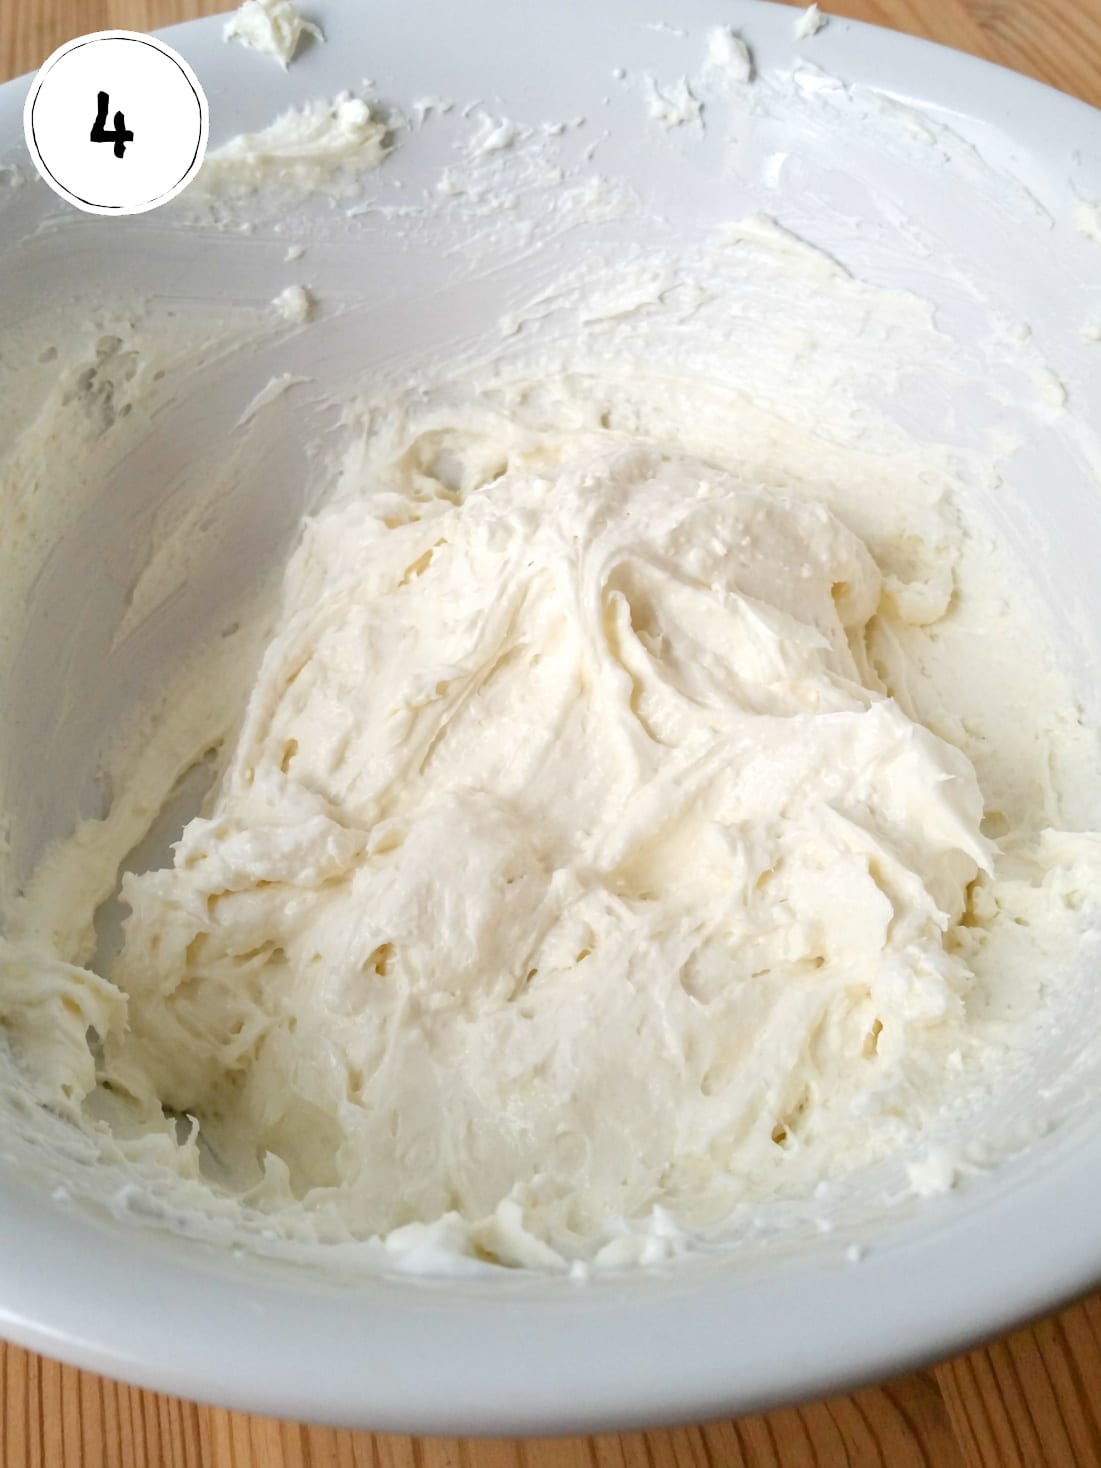 Sugar, cream cheese and whipped topping mixed in bowl.